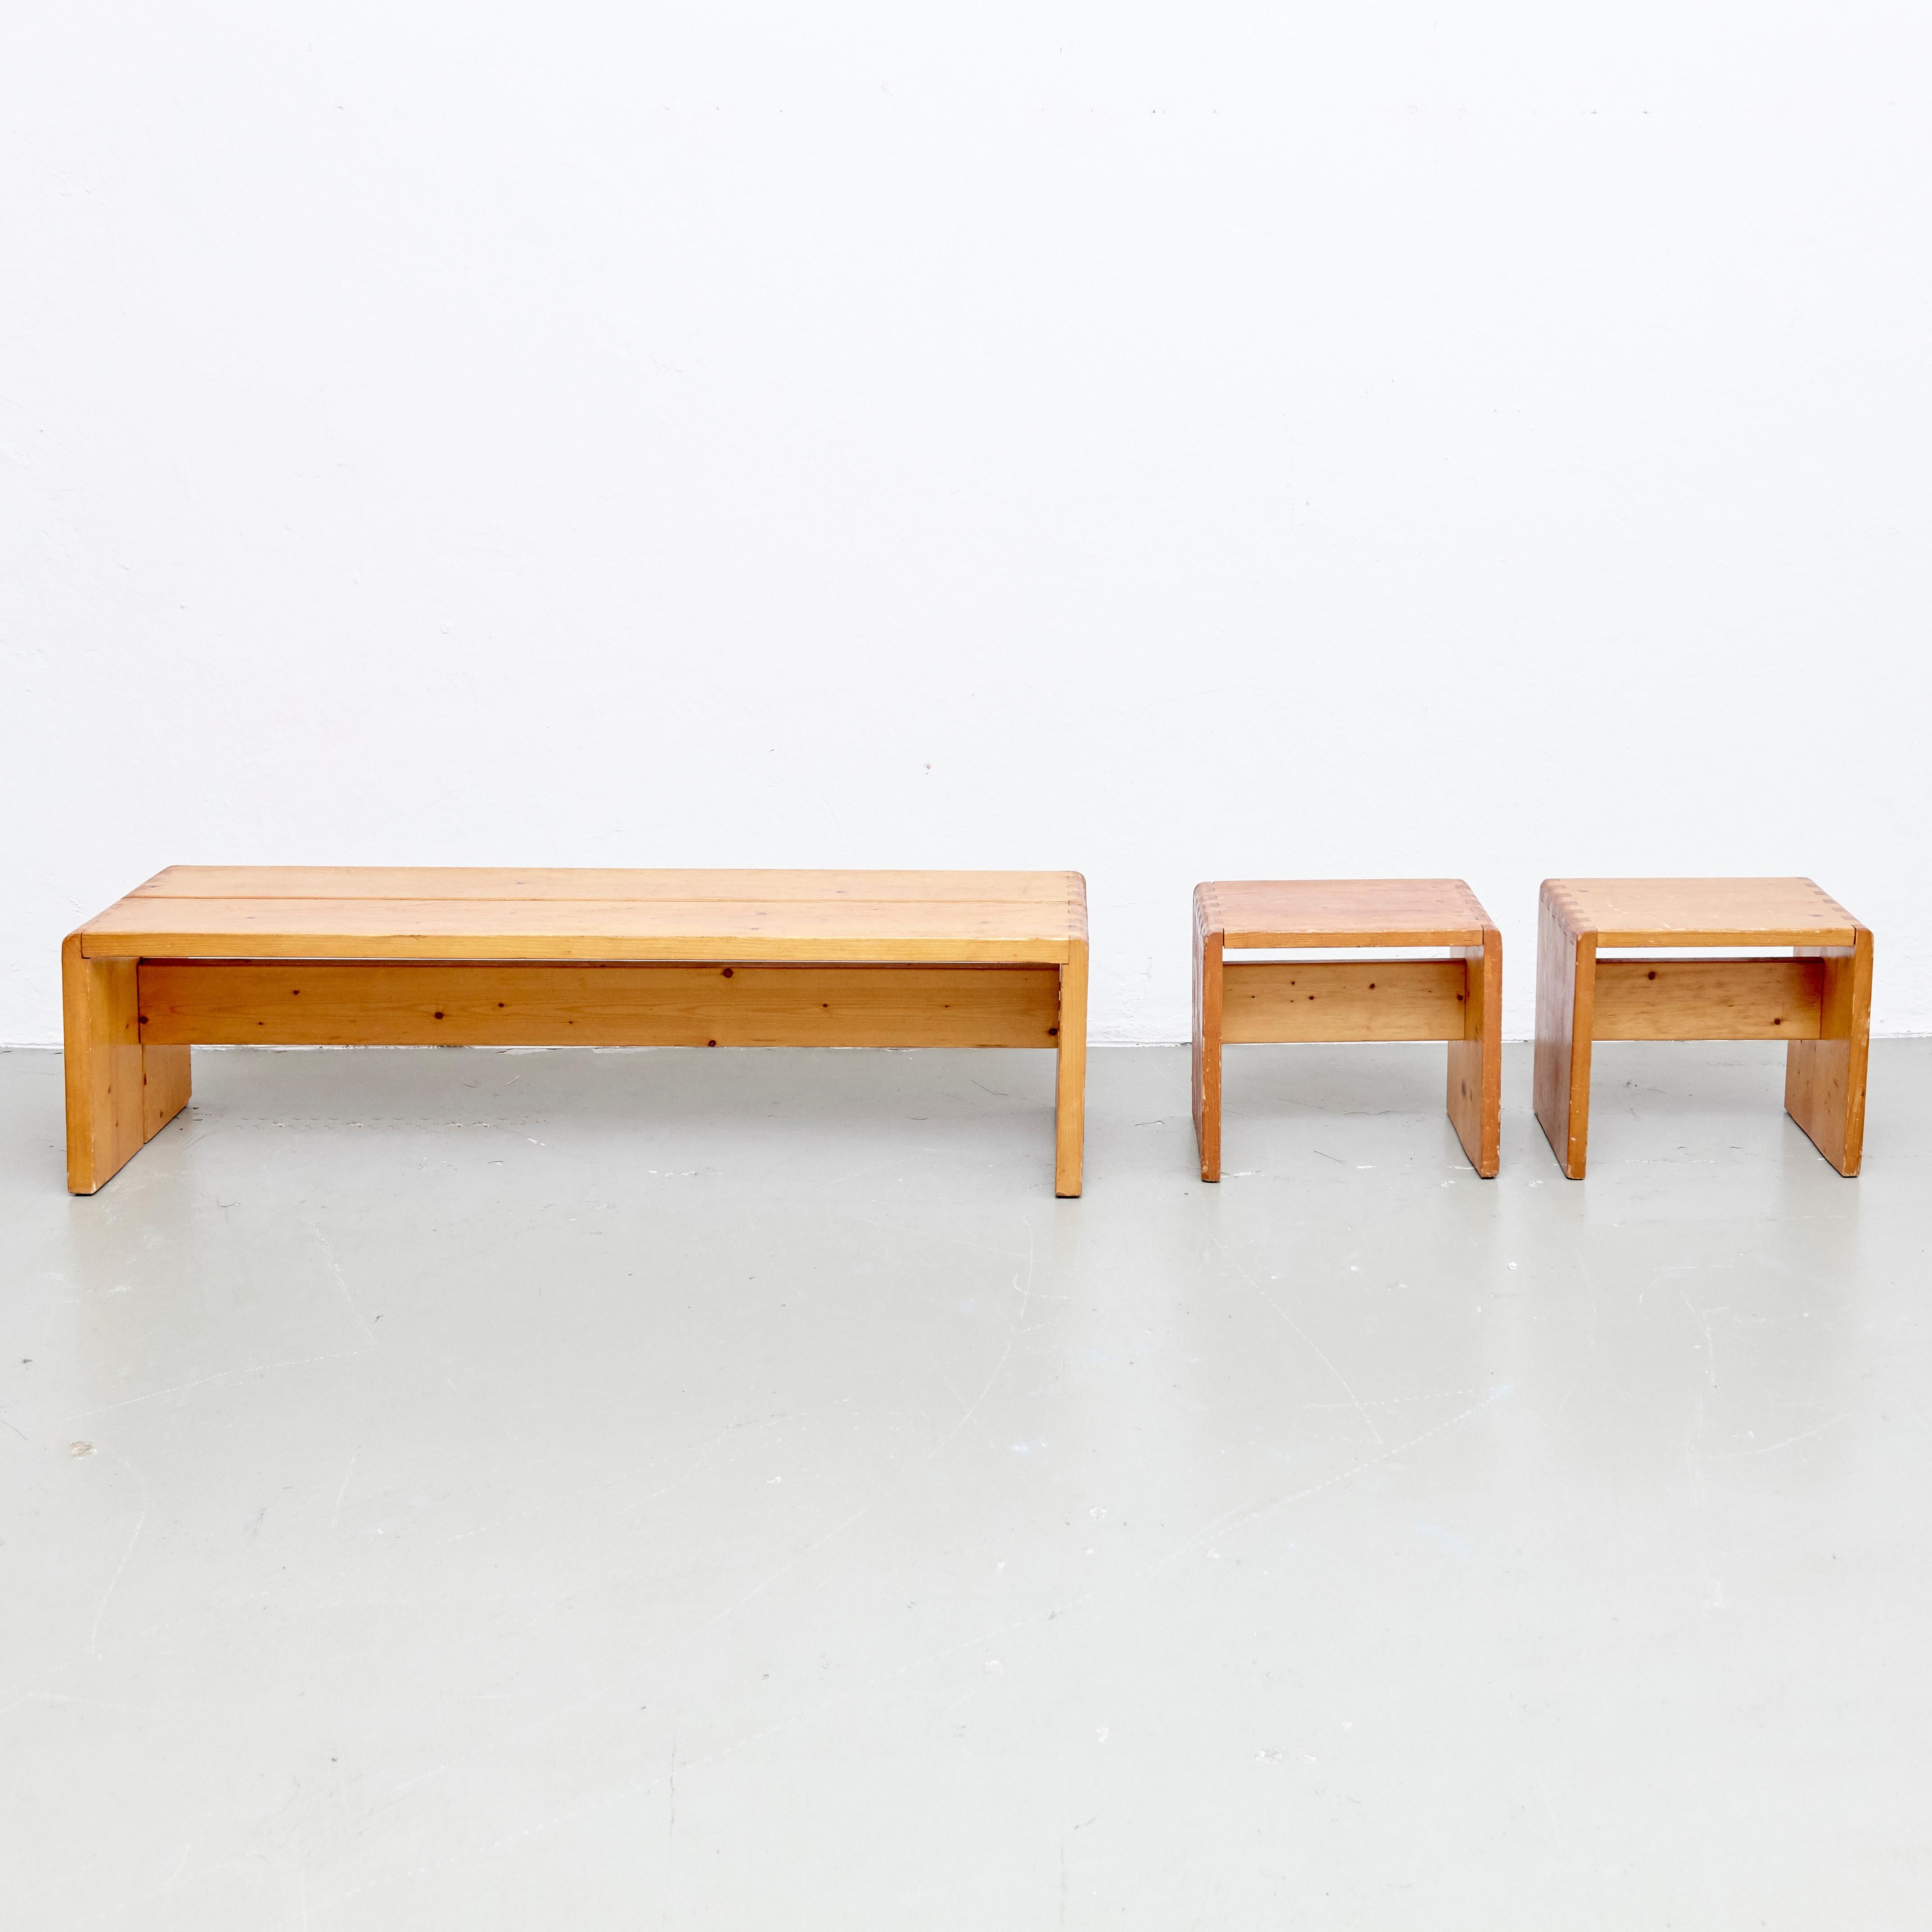 Pine Charlotte Perriand Table, Stools and Bench for Les Arcs